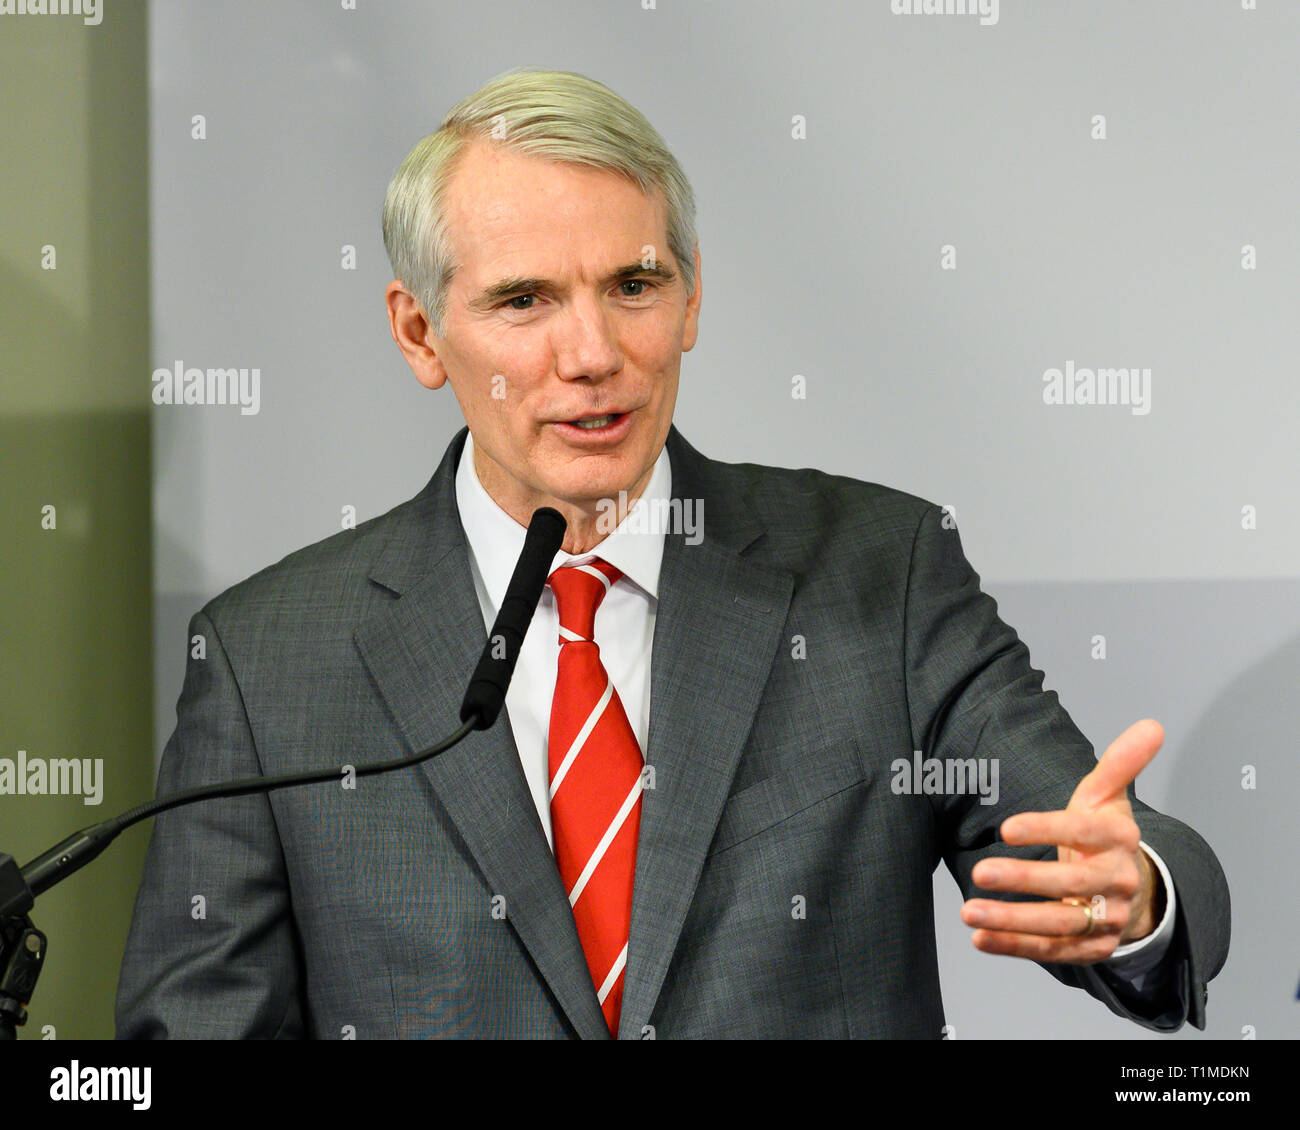 U.S. Senator Rob Portman (R-OH) seen speaking during a program titled 'Tracking Federal Funding to Combat the Opioid Crisis' at the Bipartisan Policy Center in Washington, DC. Stock Photo